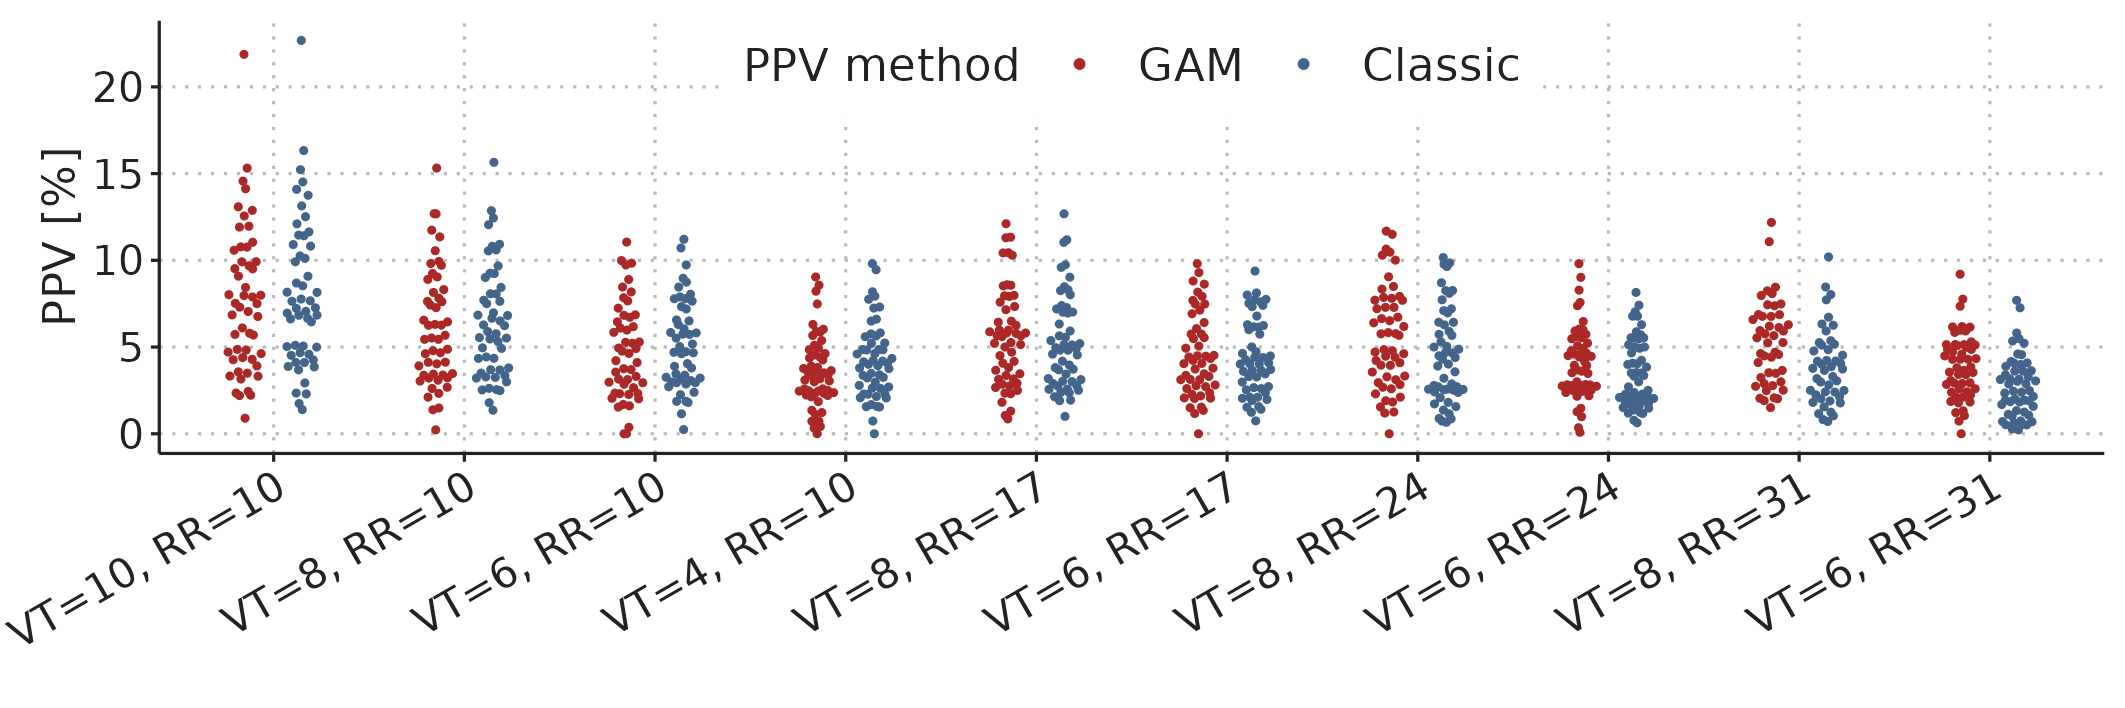 PPV (GAM and Classic) for all ventilator settings in 52 subjects (n = 507 for both methods).